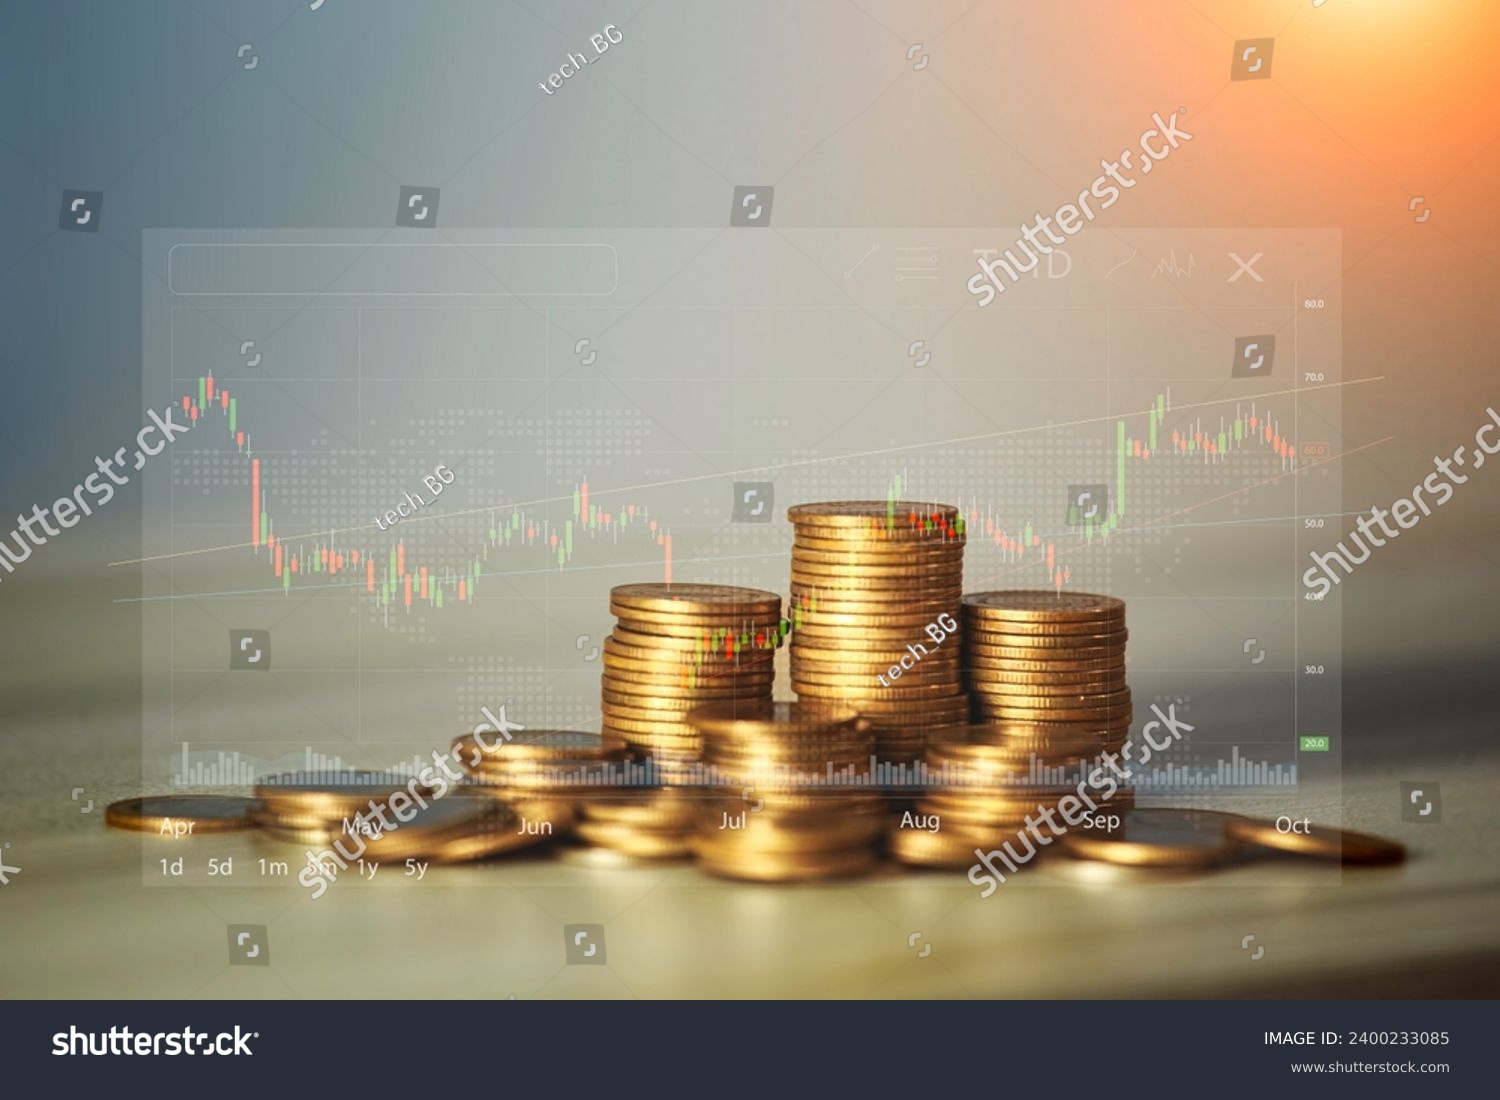 coin is placed in a graph showing a decrease in interest and inflation has declined worldwide. stock investment concept wealth stock market volatility Inflation decreases, investor wealth decreases. #2400233085